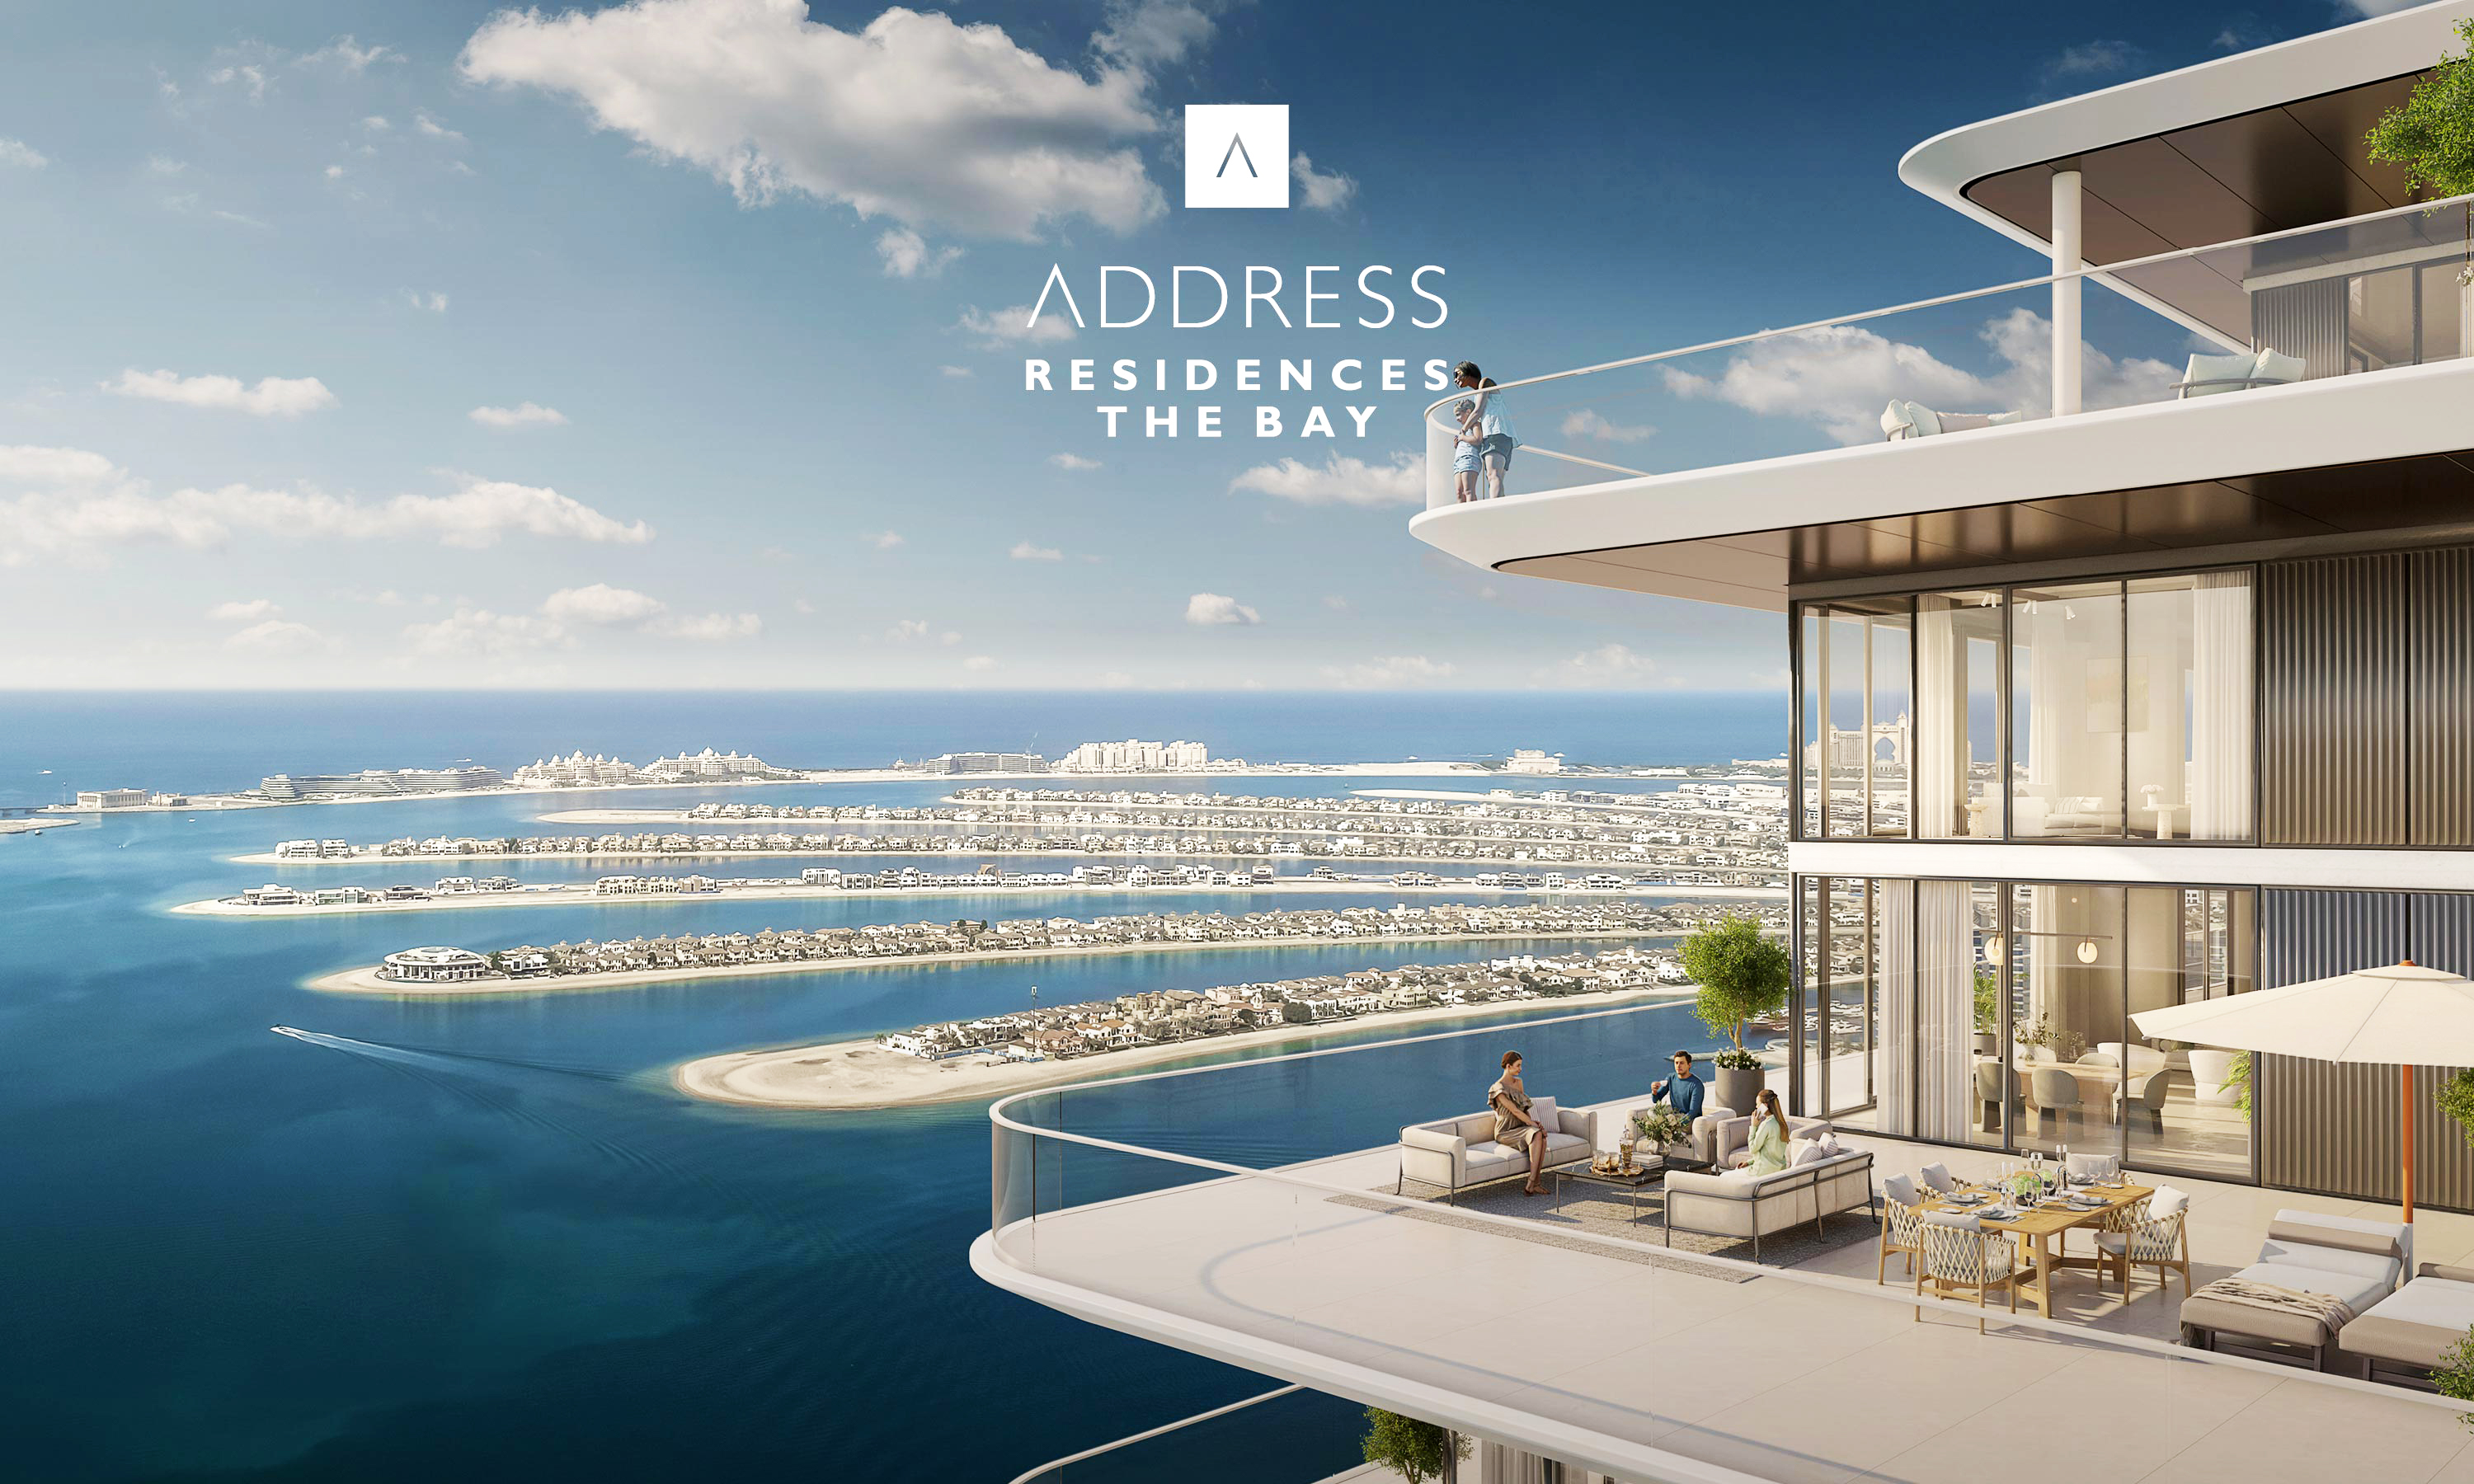 Gallery Address Residences The Bay